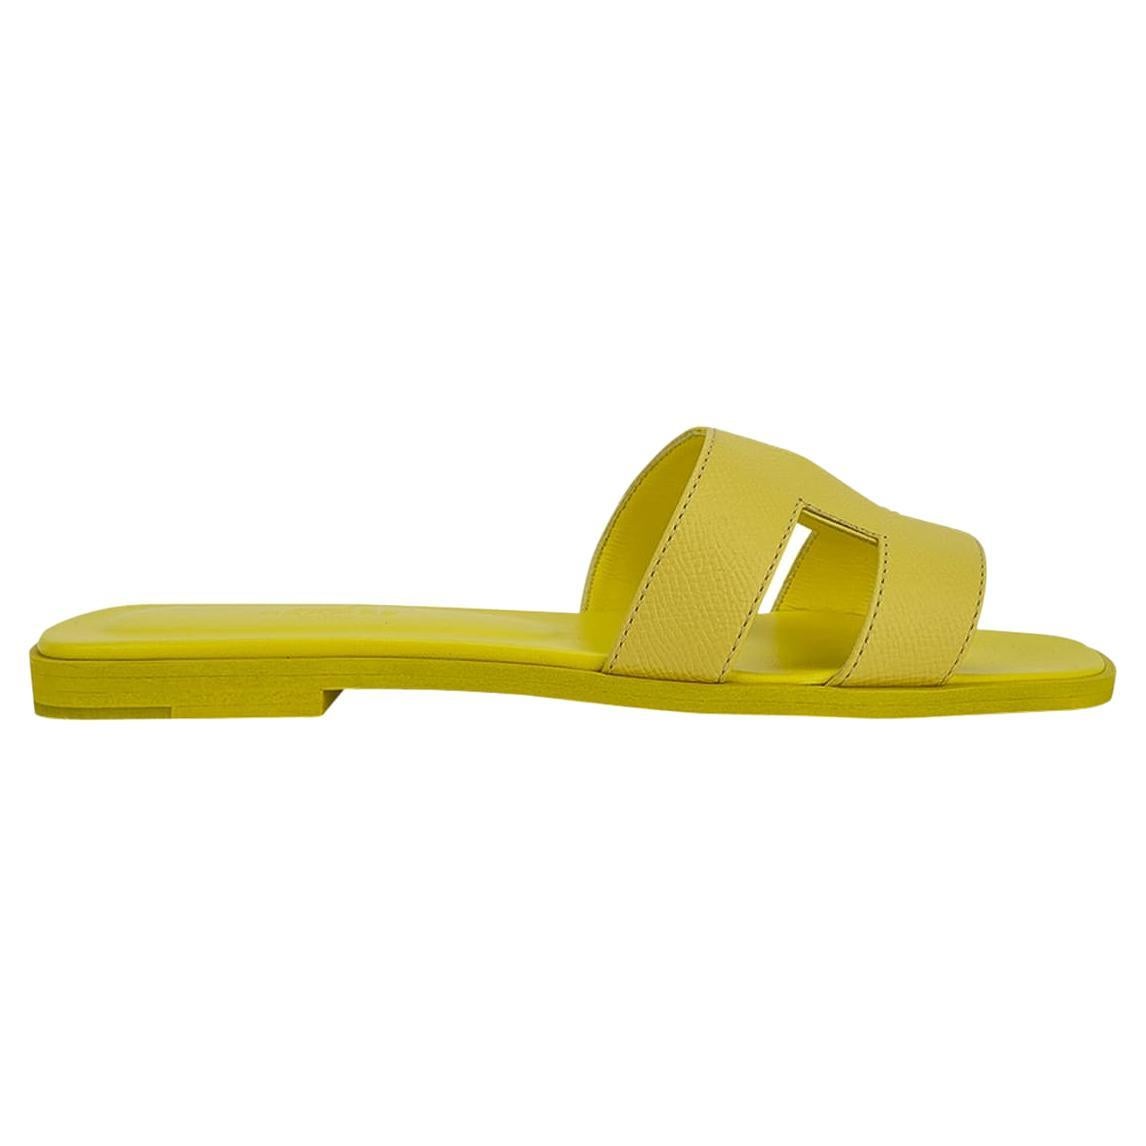 Mightychic offers a pair of  Hermes Oran sandels shoes featured in fresh Jaune Pollen Epsom leather.
The iconic top stitched H cutout over the top of the slide in Epsom.
Matching embossed calfskin insole. 
Wood heel with leather sole. 
Comes with